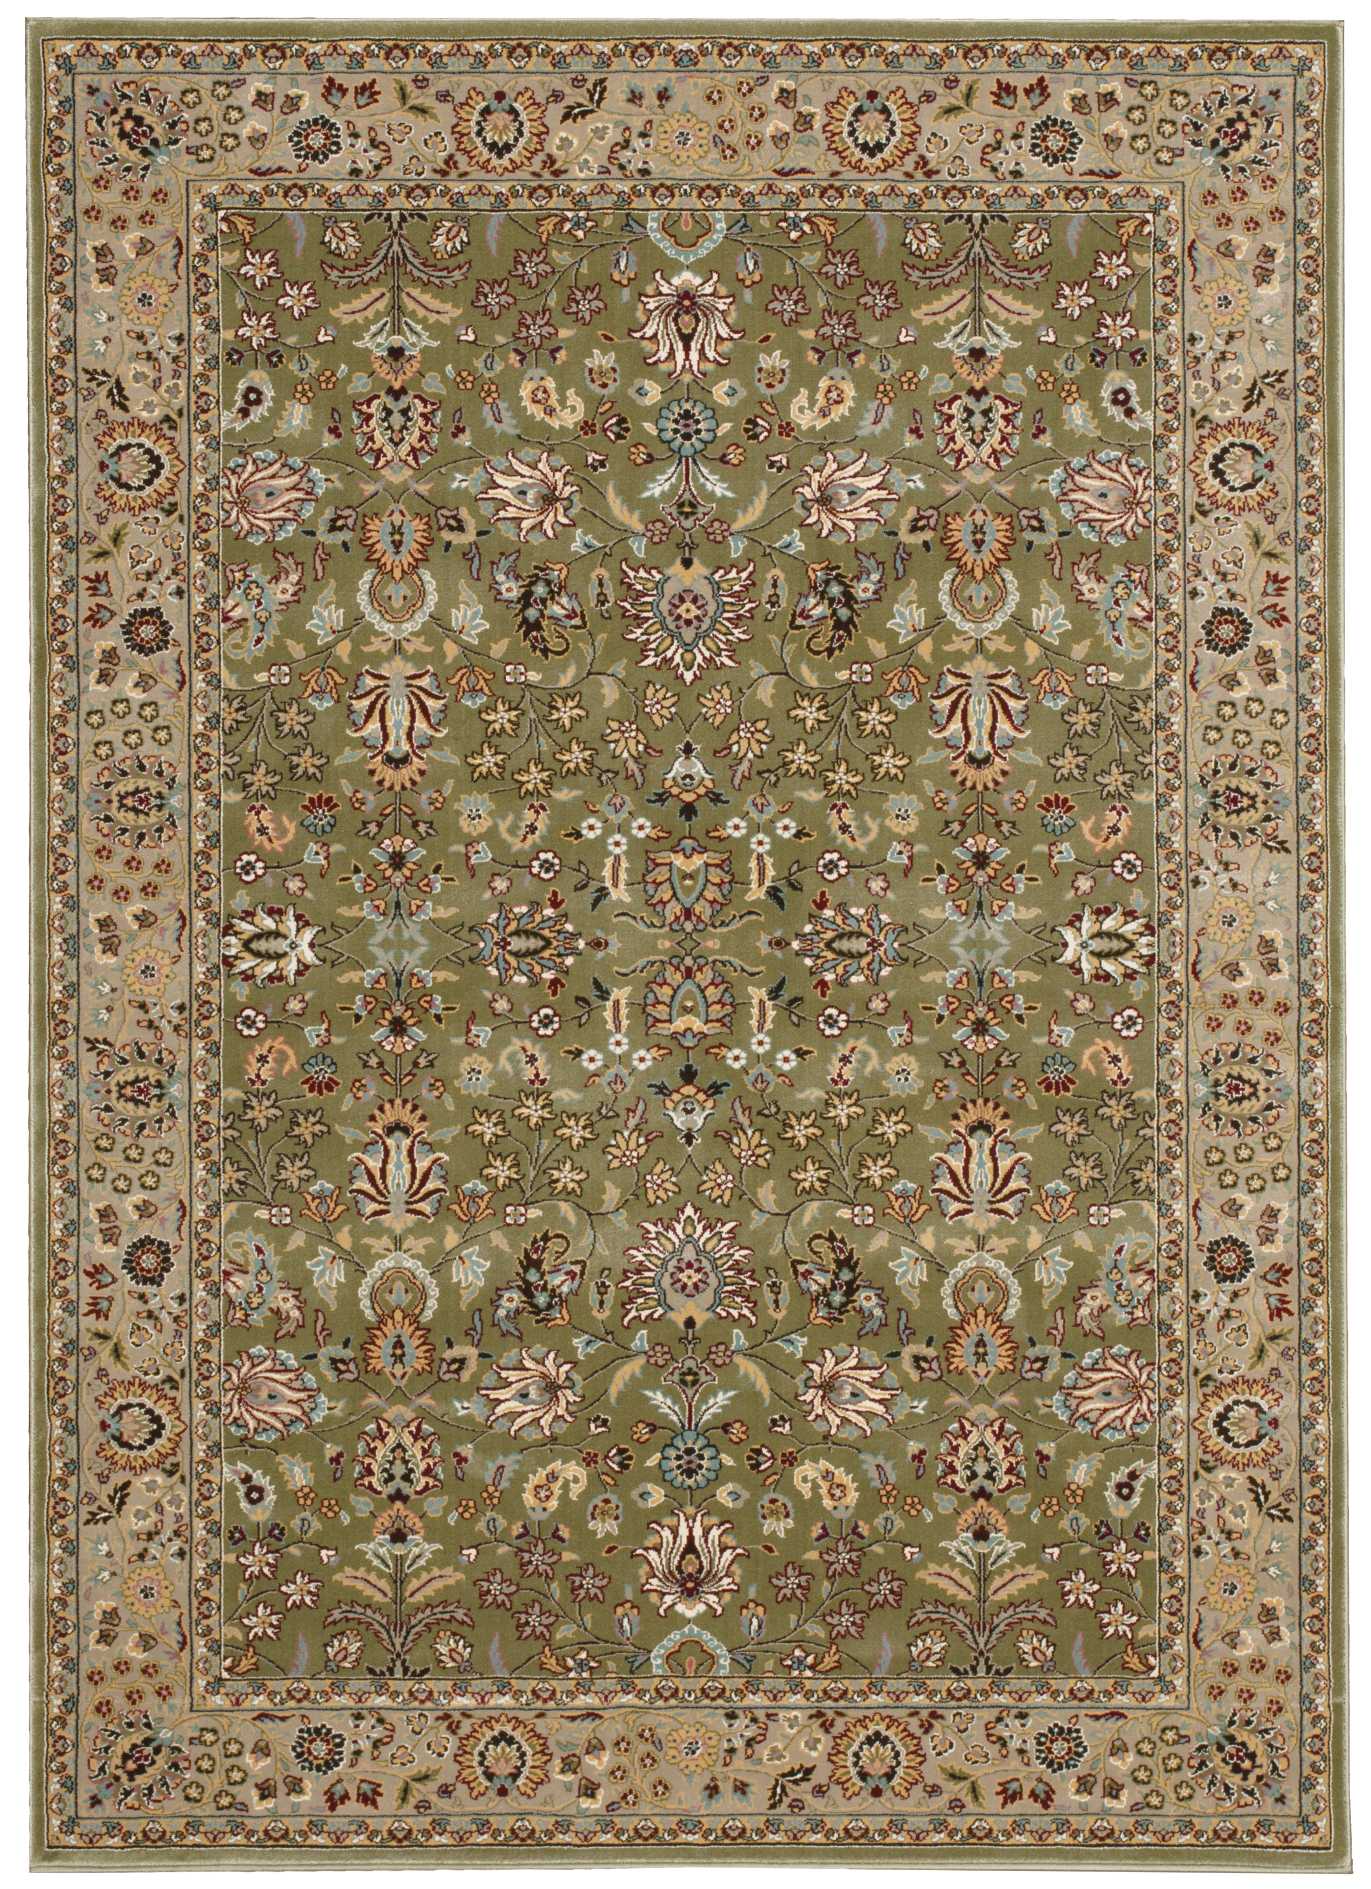 Kathy Ireland Antiquities Royal Countryside Sage Area Rug by Nourison